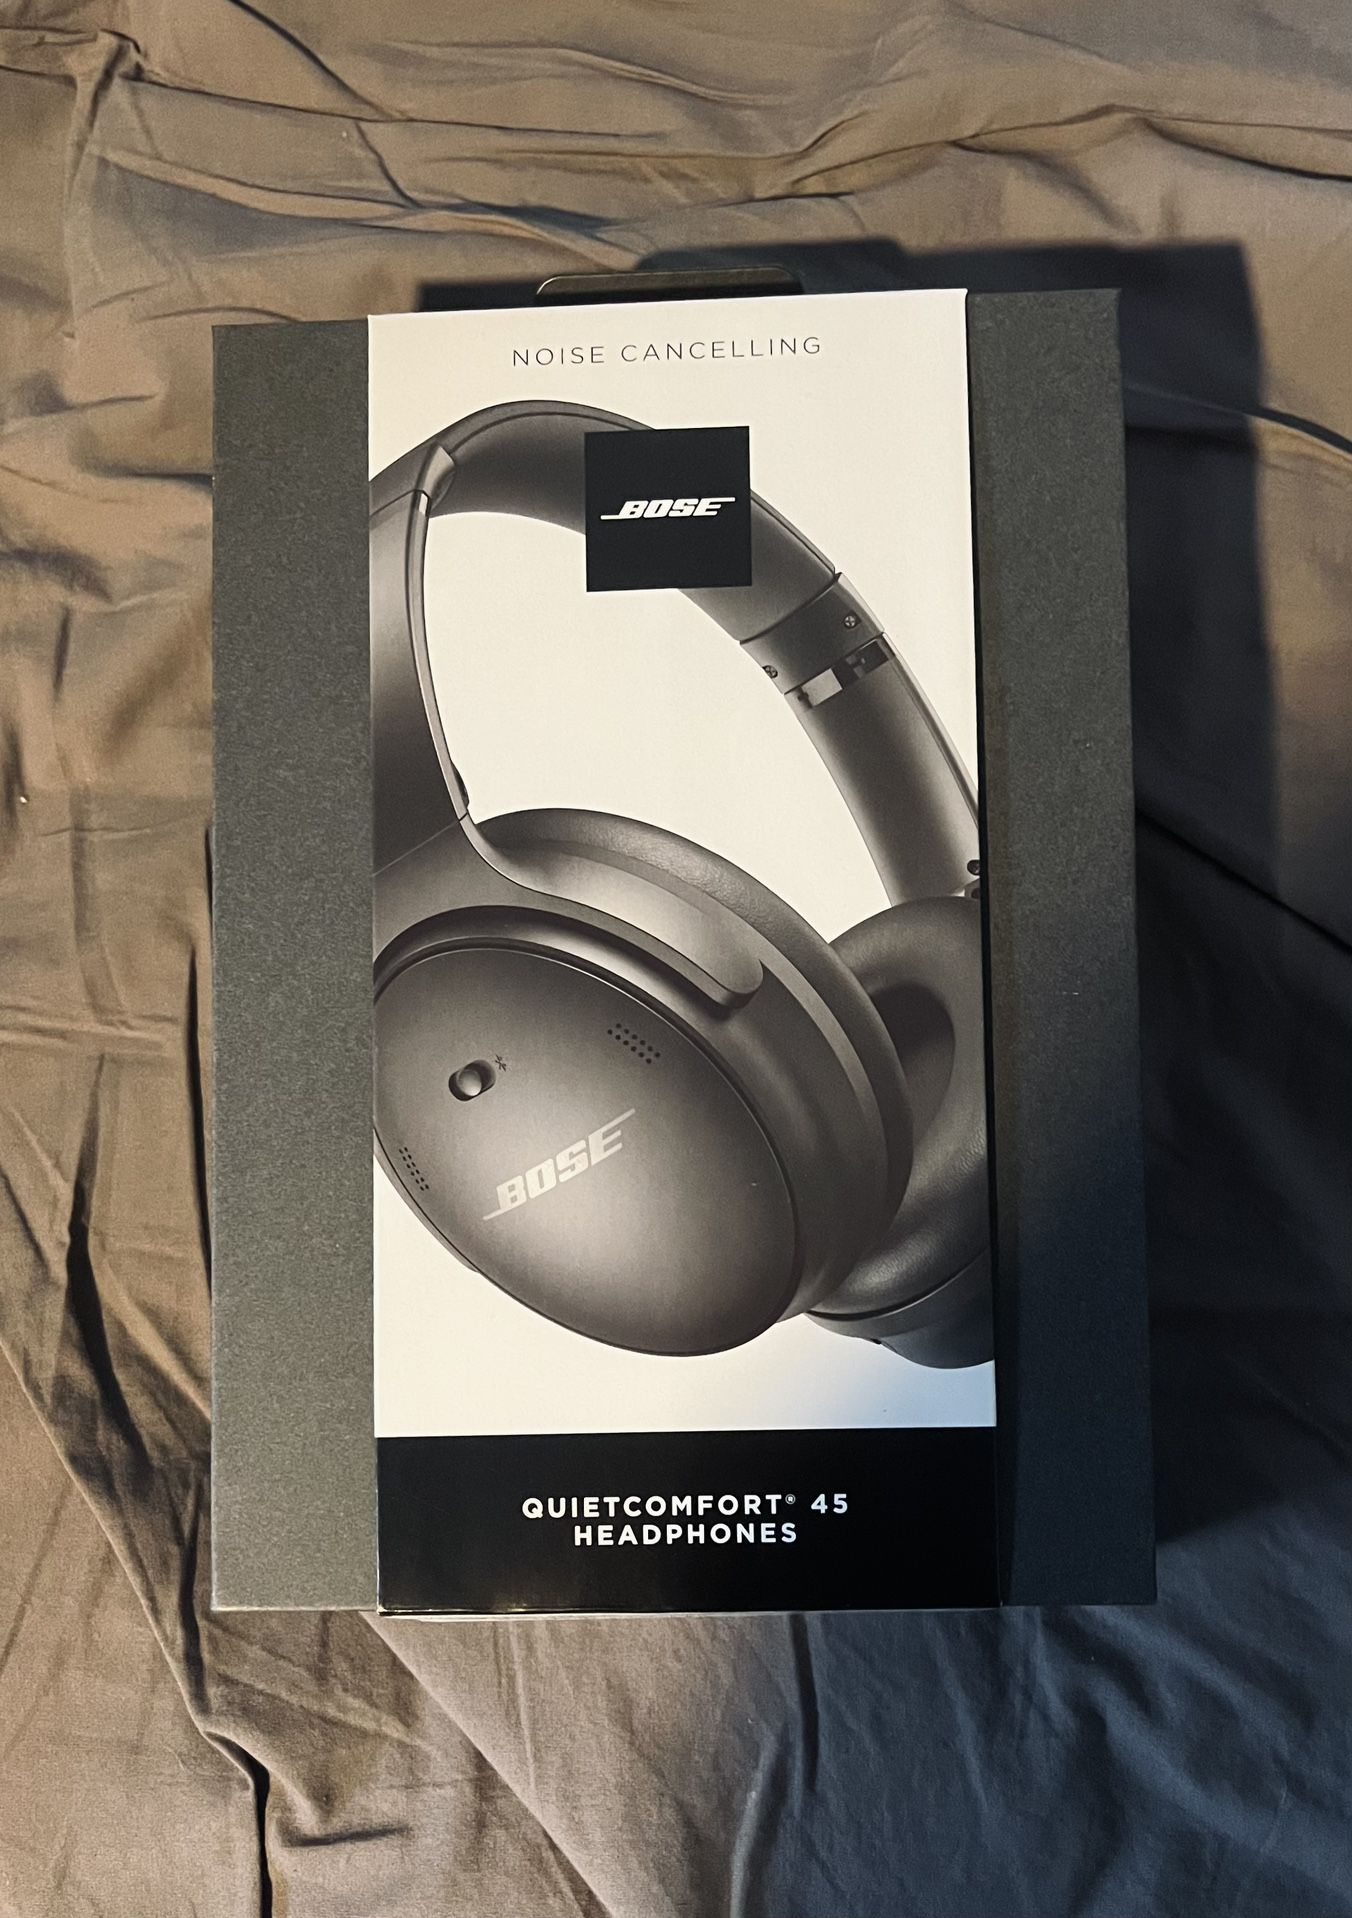 BOSE QC45 BLUETOOTH HEADPHONES NOISE CANCELING OFFERS ACCEPTED WITH EVERYTHING